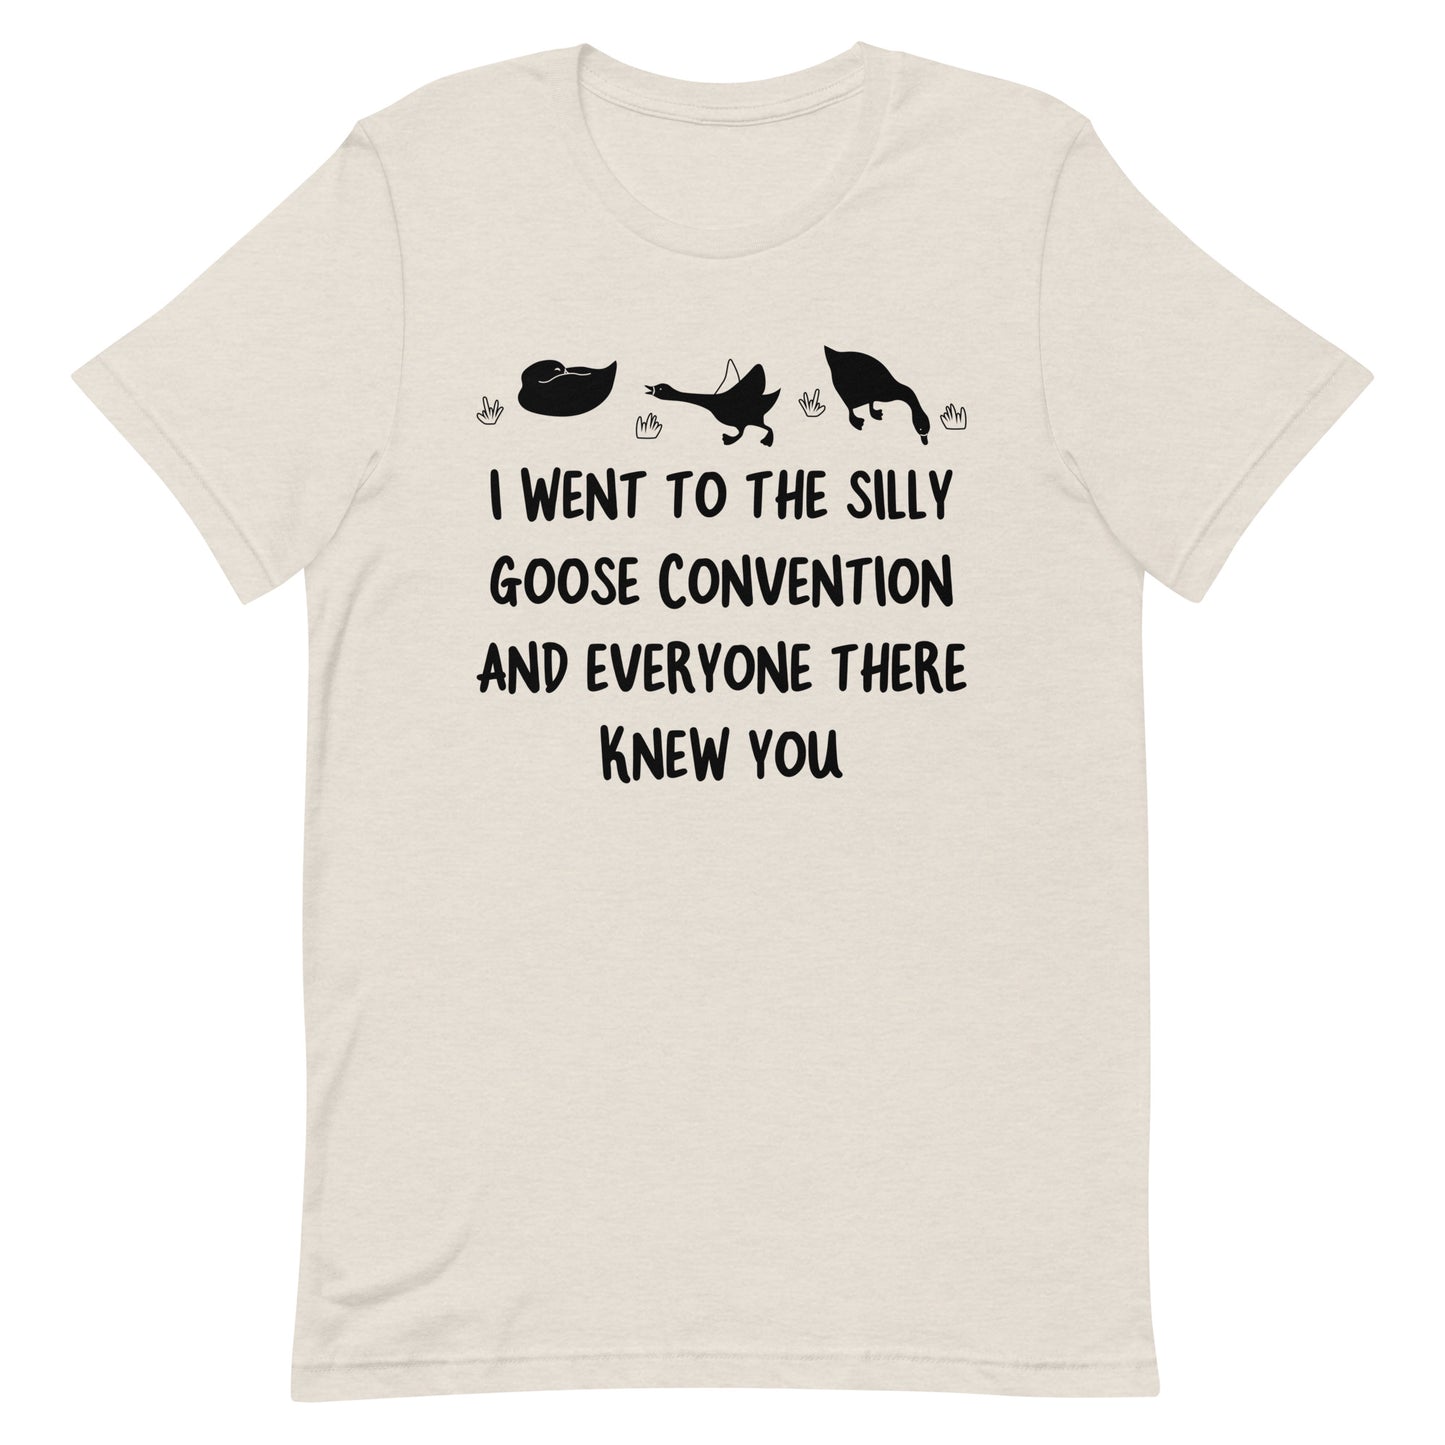 The Silly Goose Convention Unisex t-shirt